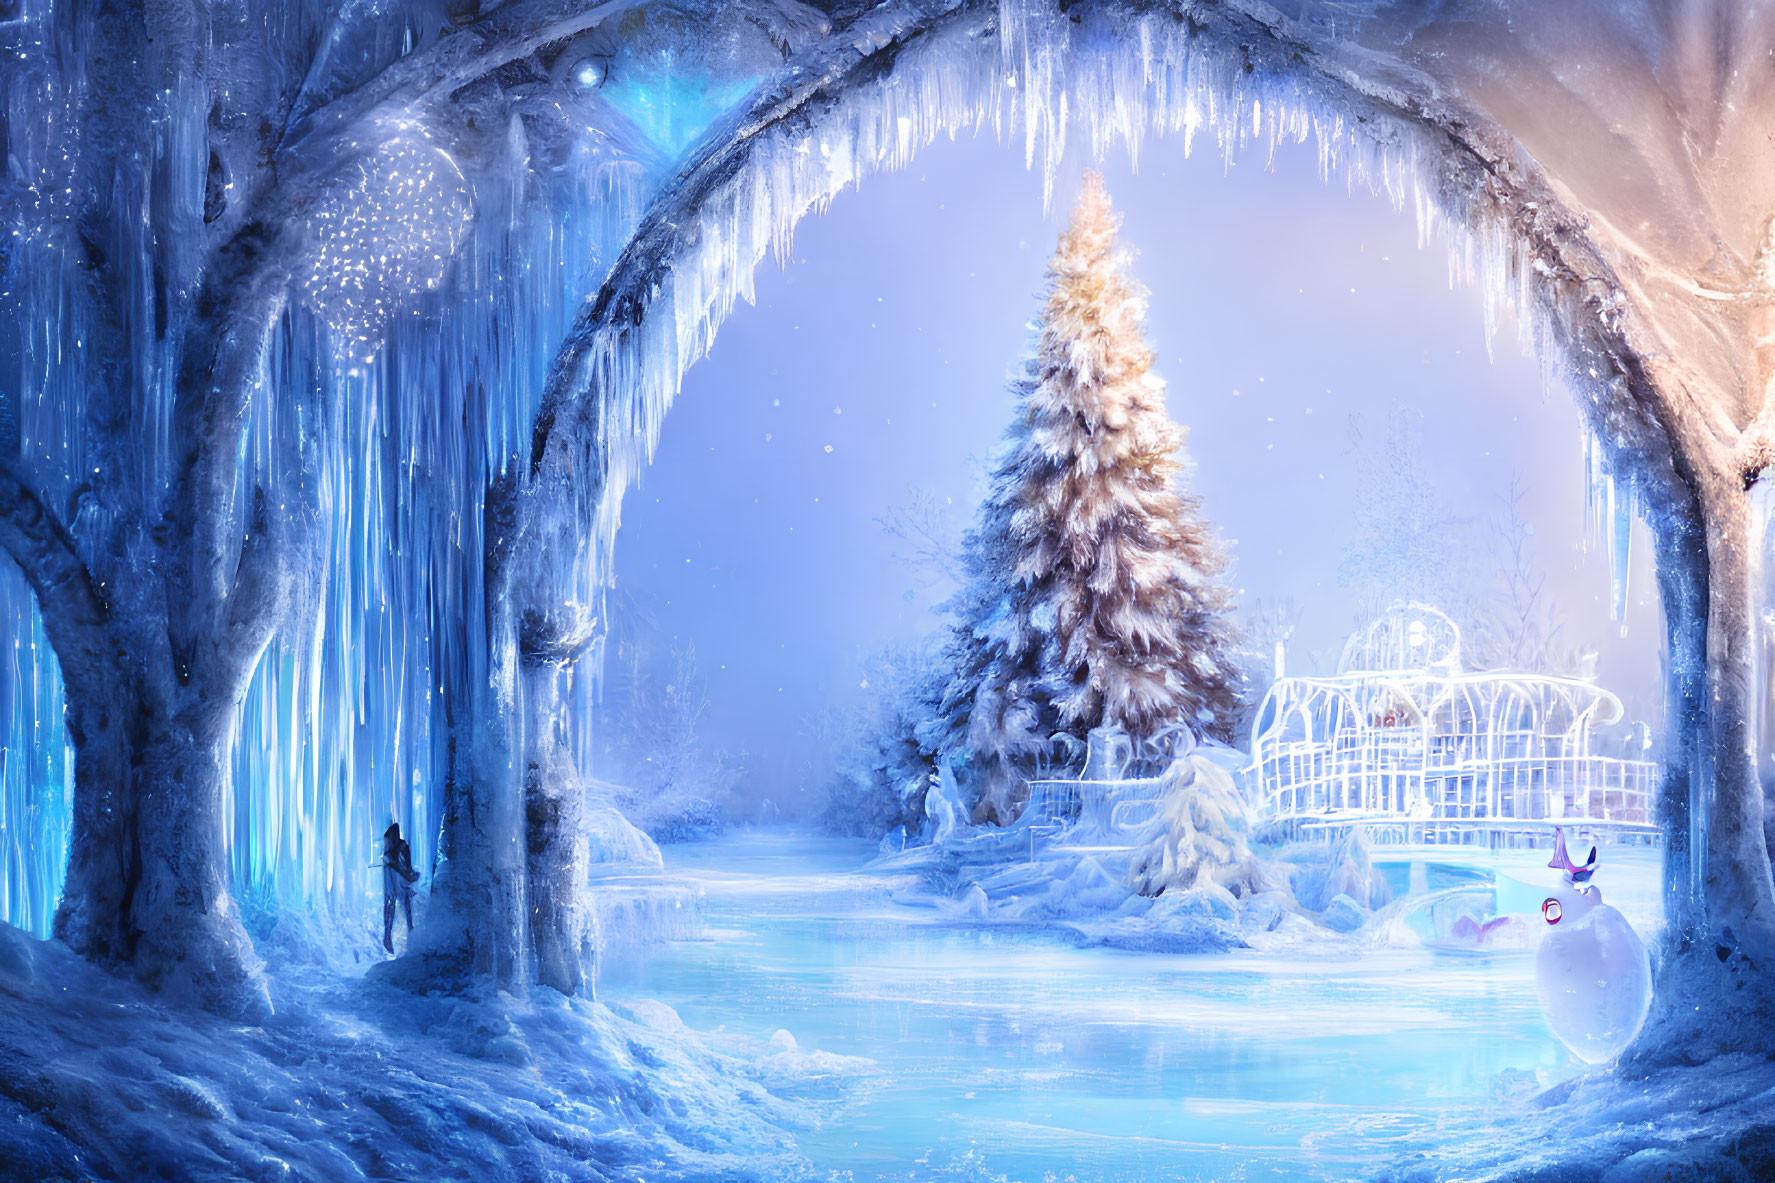 Frozen river, ice-covered trees, icicles, Christmas tree, snowman, and gazebo in